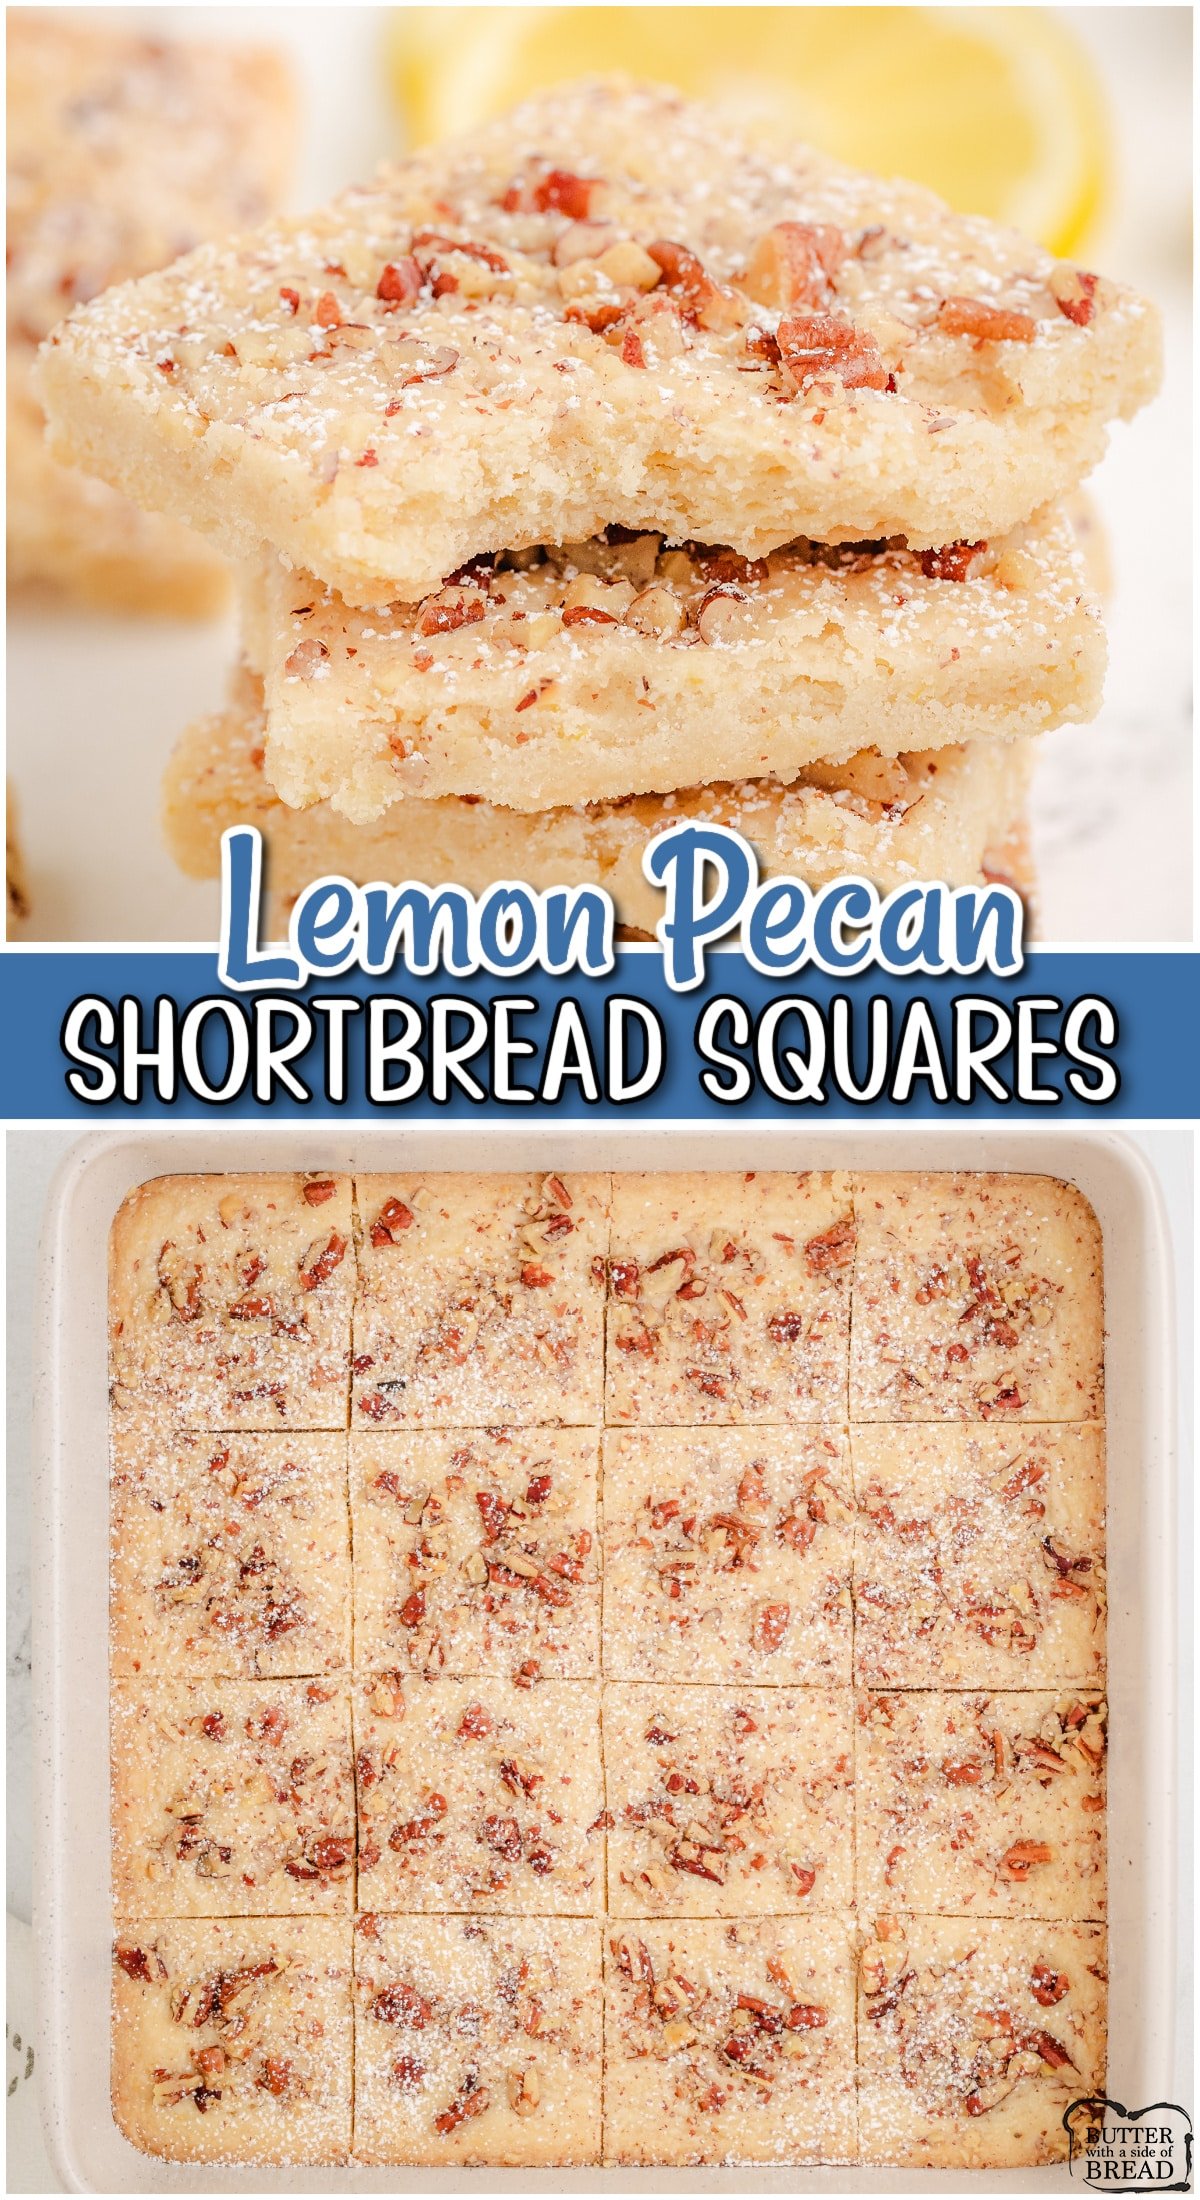 Lemon Pecan Shortbread is a classic dessert known for the tender, buttery texture & bright flavor! Delightful lemon cookies everyone loves! 